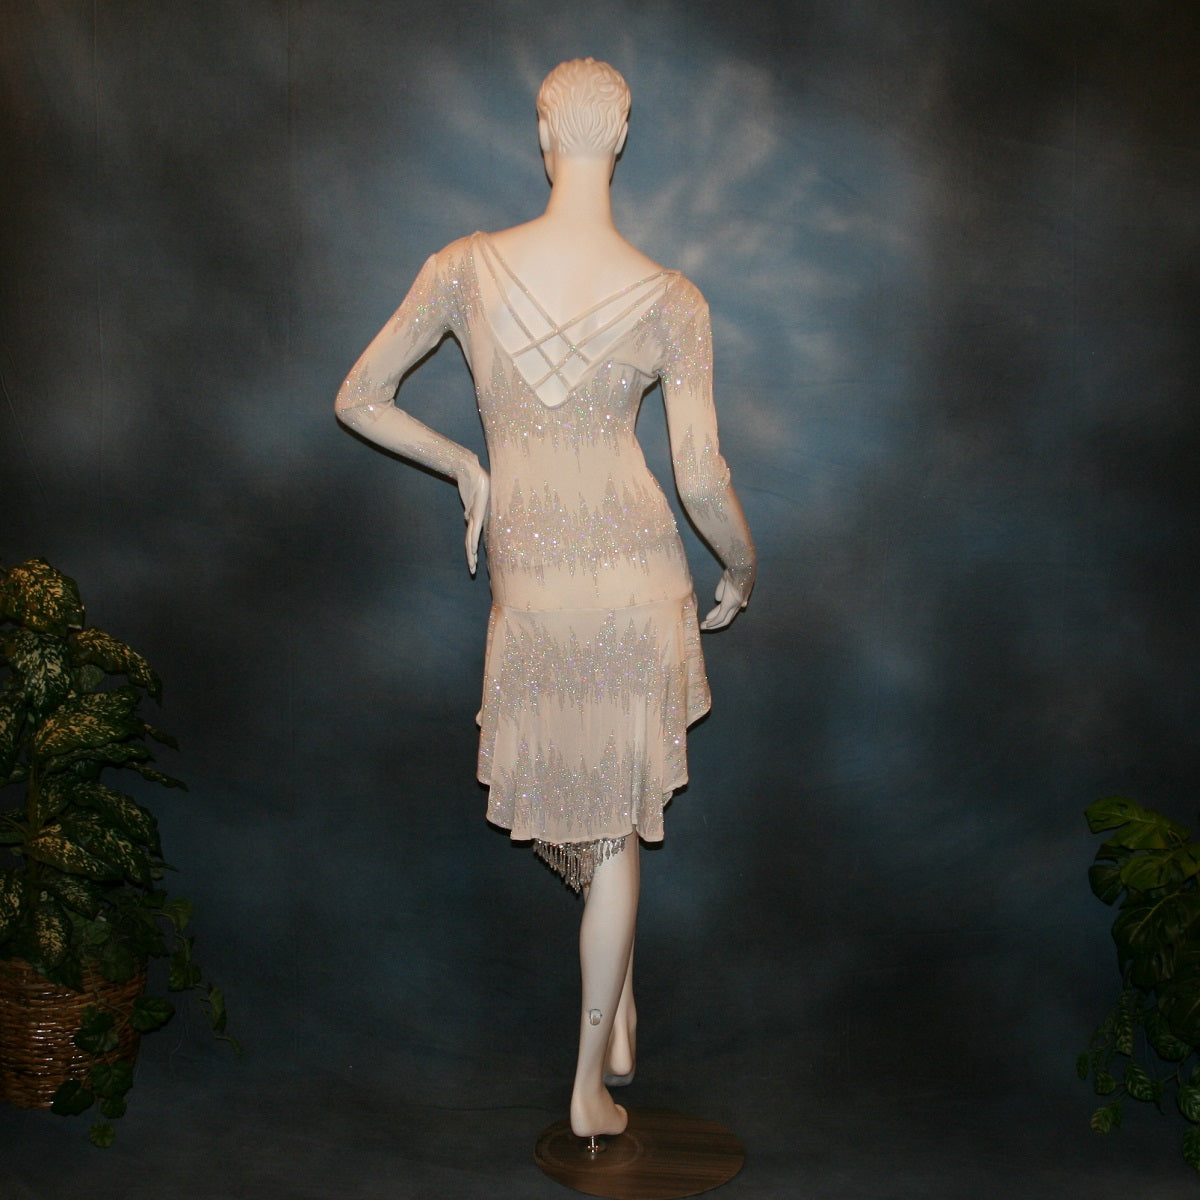 back view of White Latin/Rhythm dress created in glitter slinky with an awesome electrifying glitter pattern, features long sleeves, lattice strap details on back & a touch of Swarovski hand beading in the skirting.